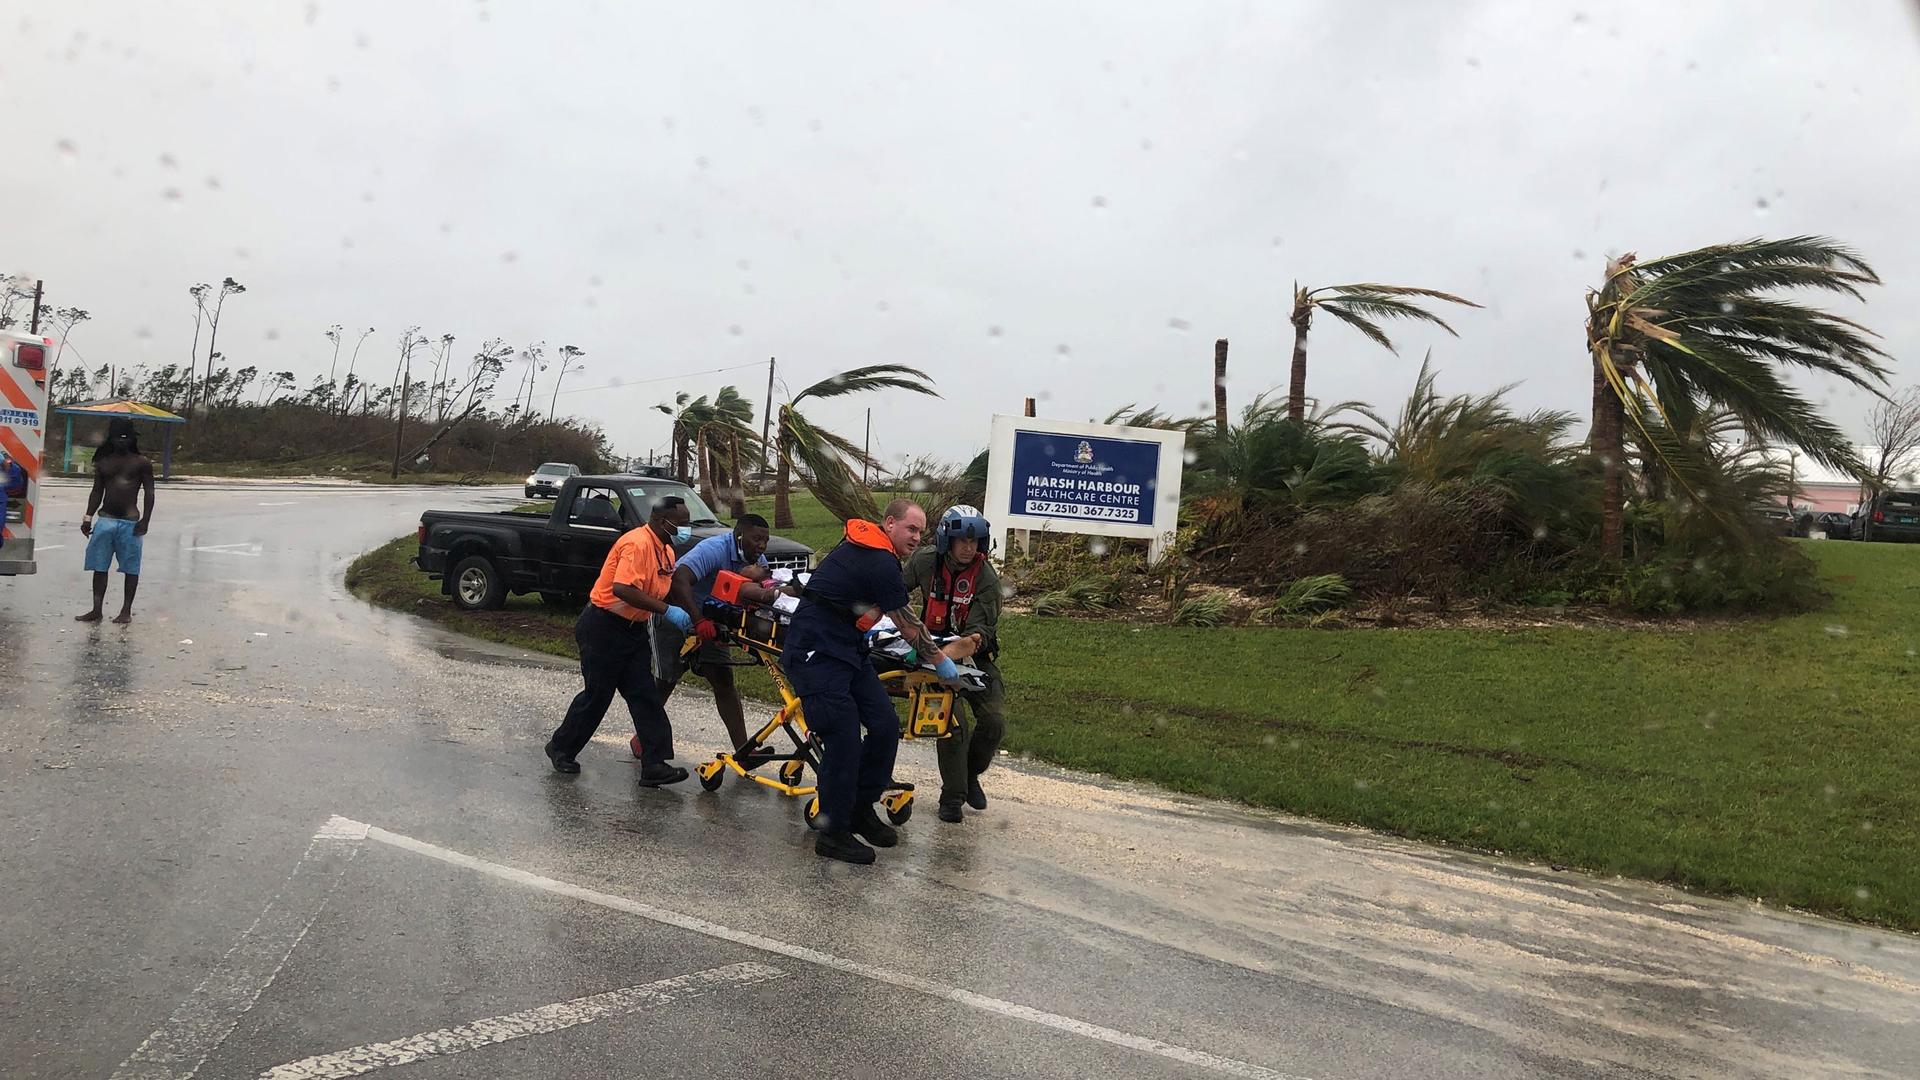 Several rescue workers are shown moving a yellow emergency stretcher down a road with winds blowing the trees in the background.